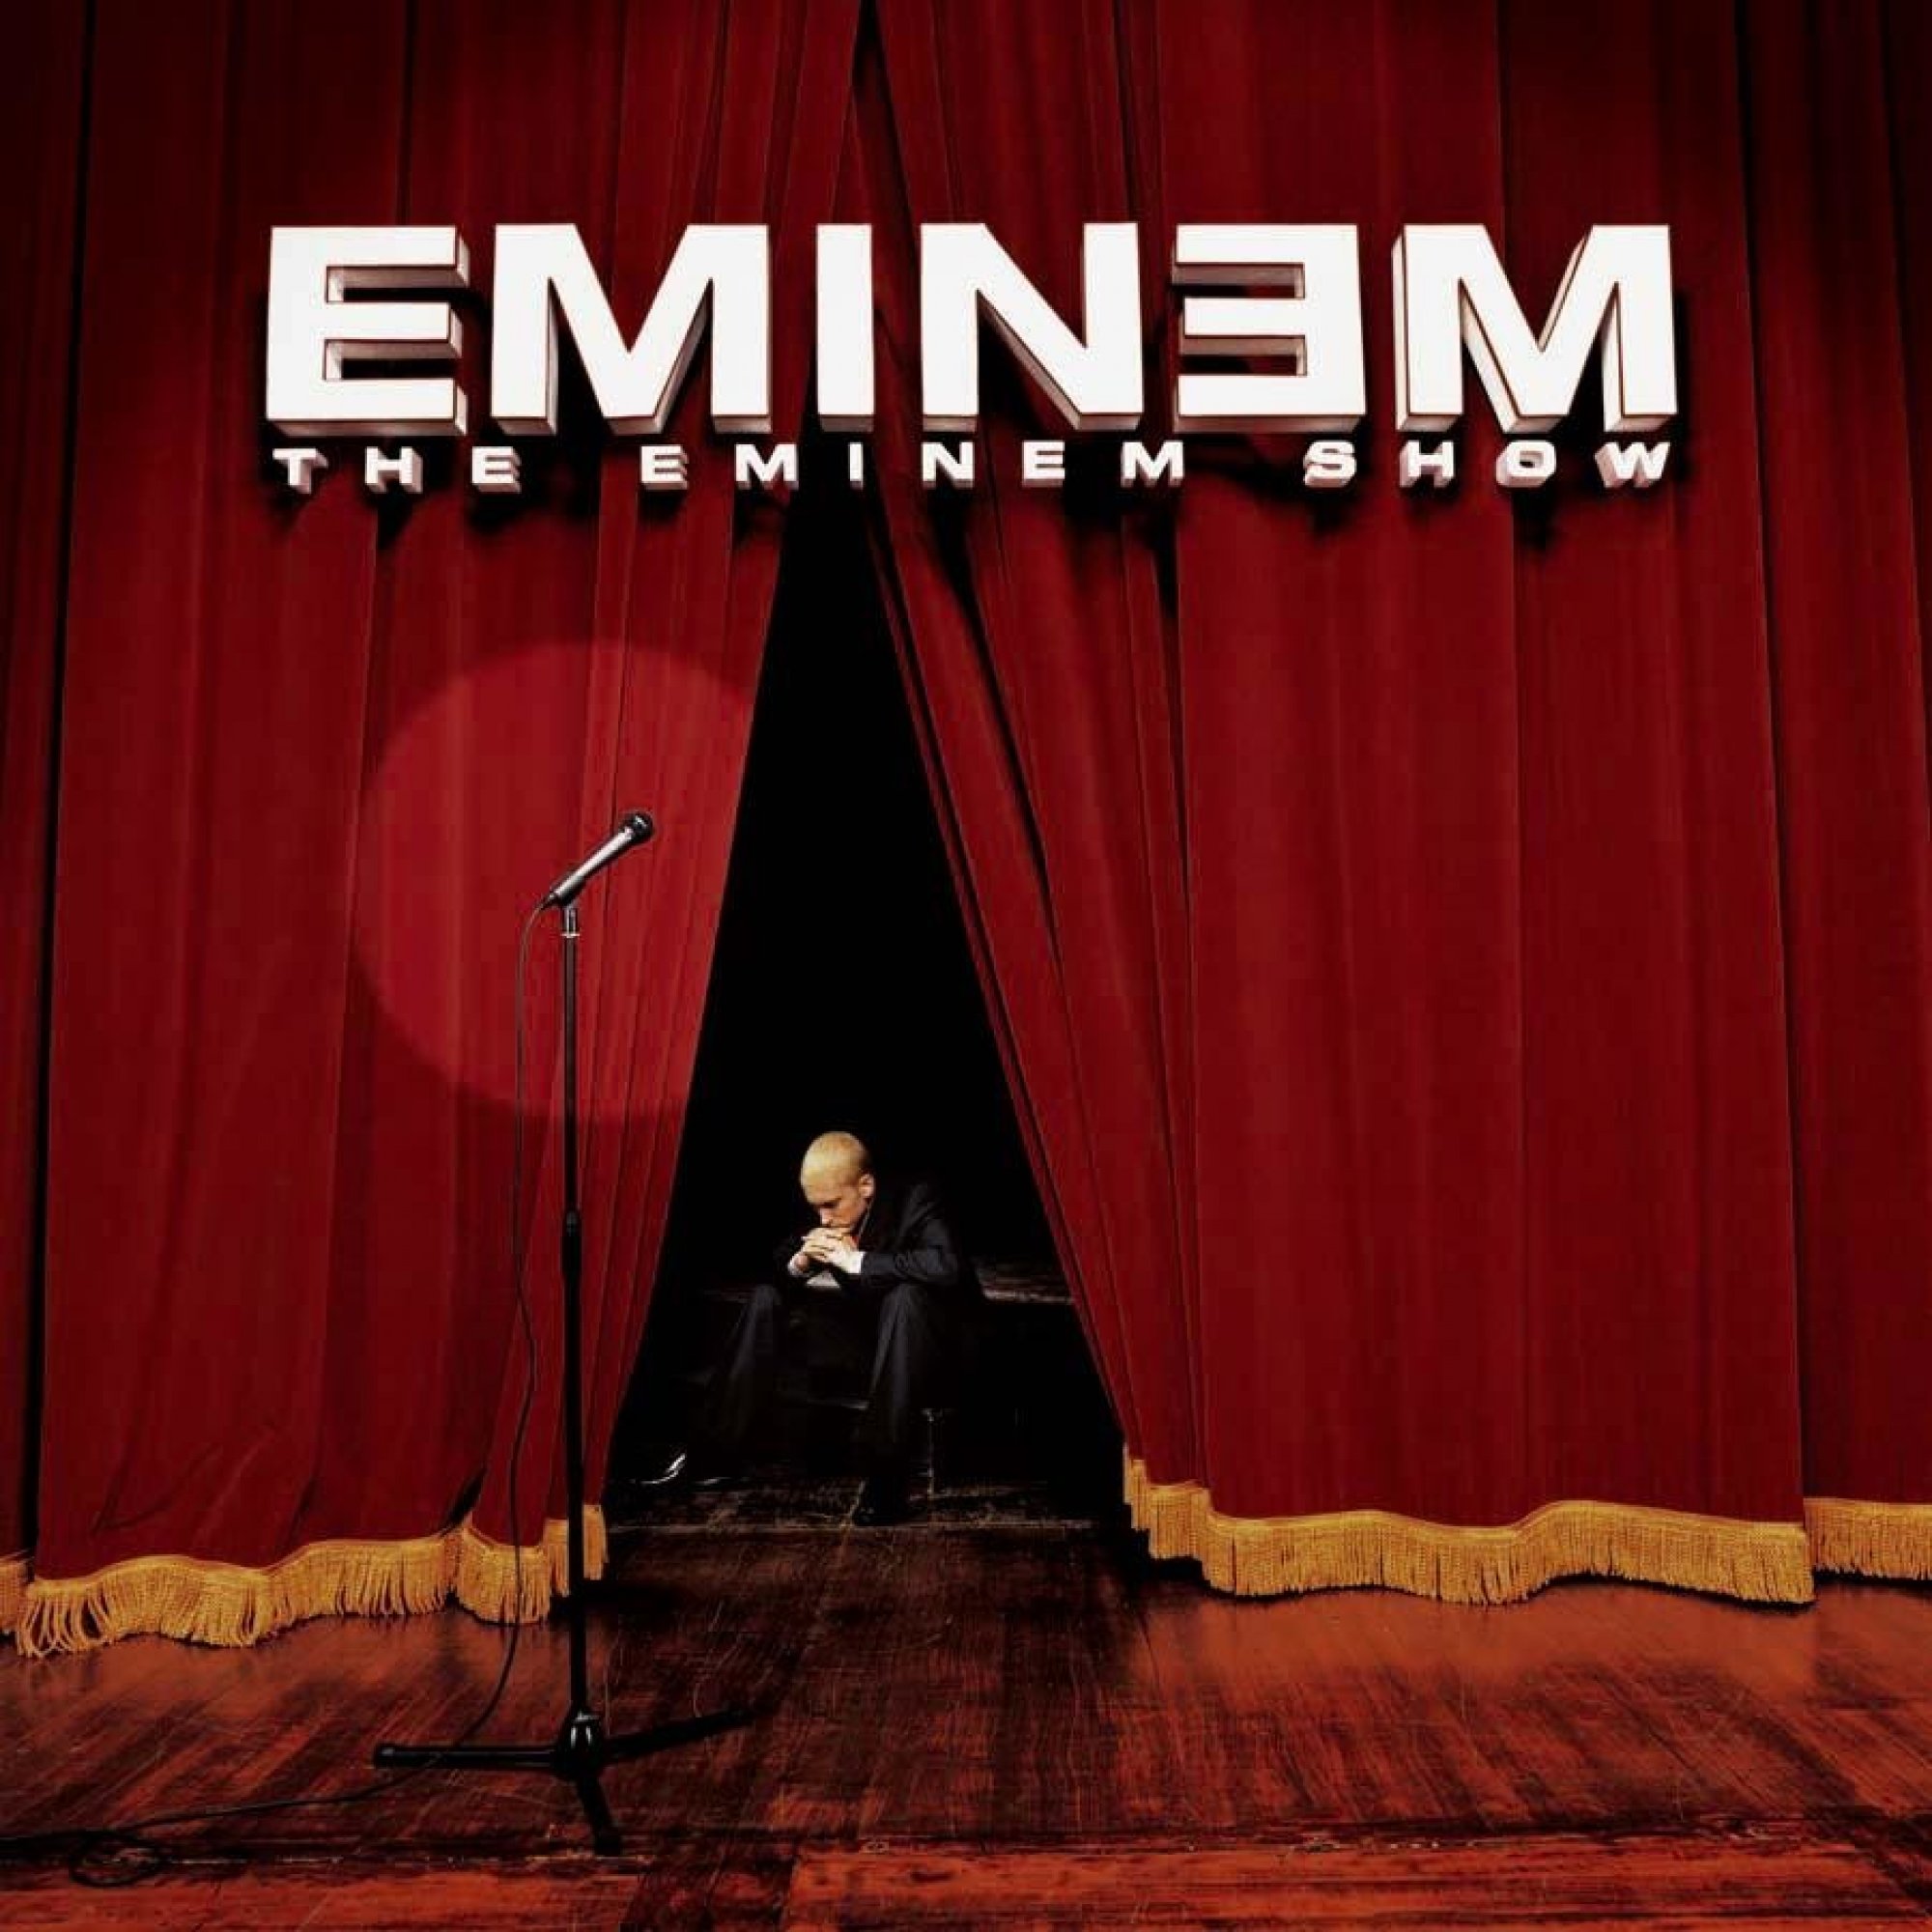 The Eminem Show (Aftermath Records)